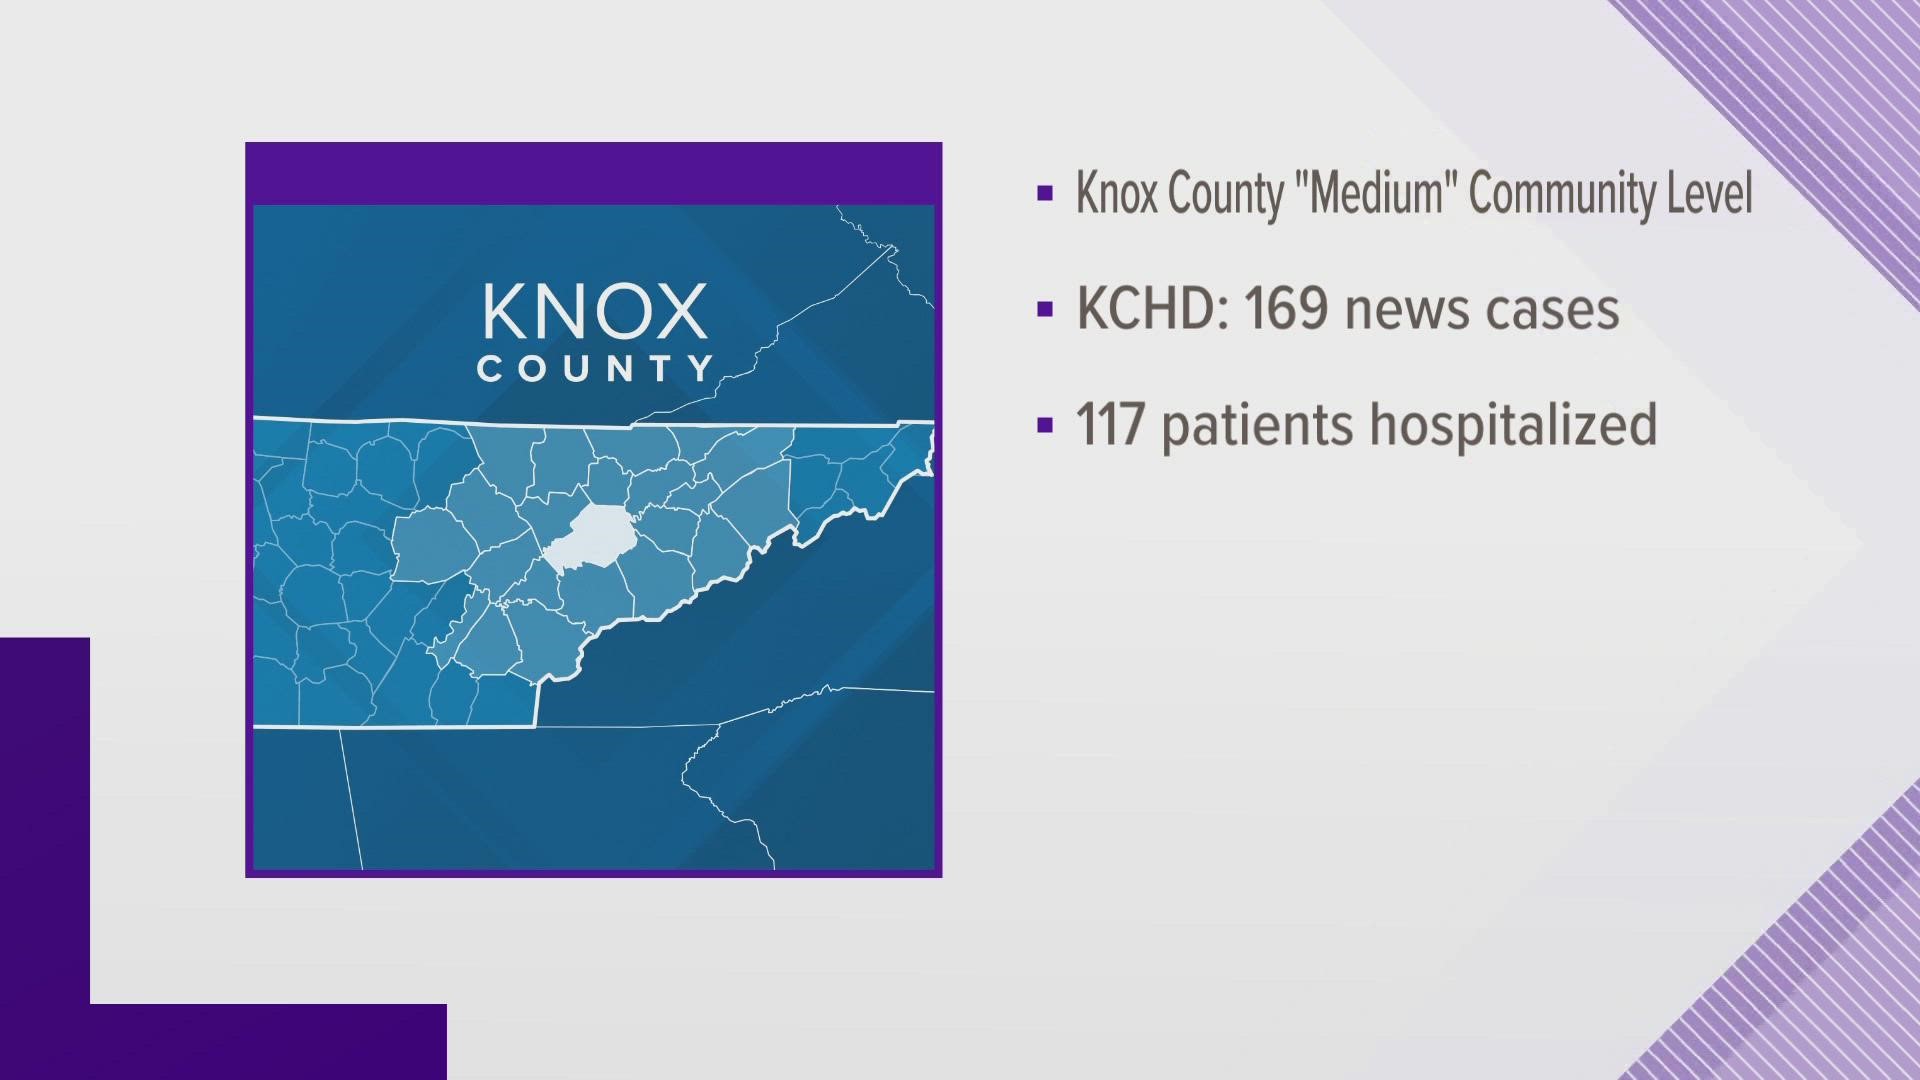 The CDC lists Knox County's community level for Covid-19 as "medium".